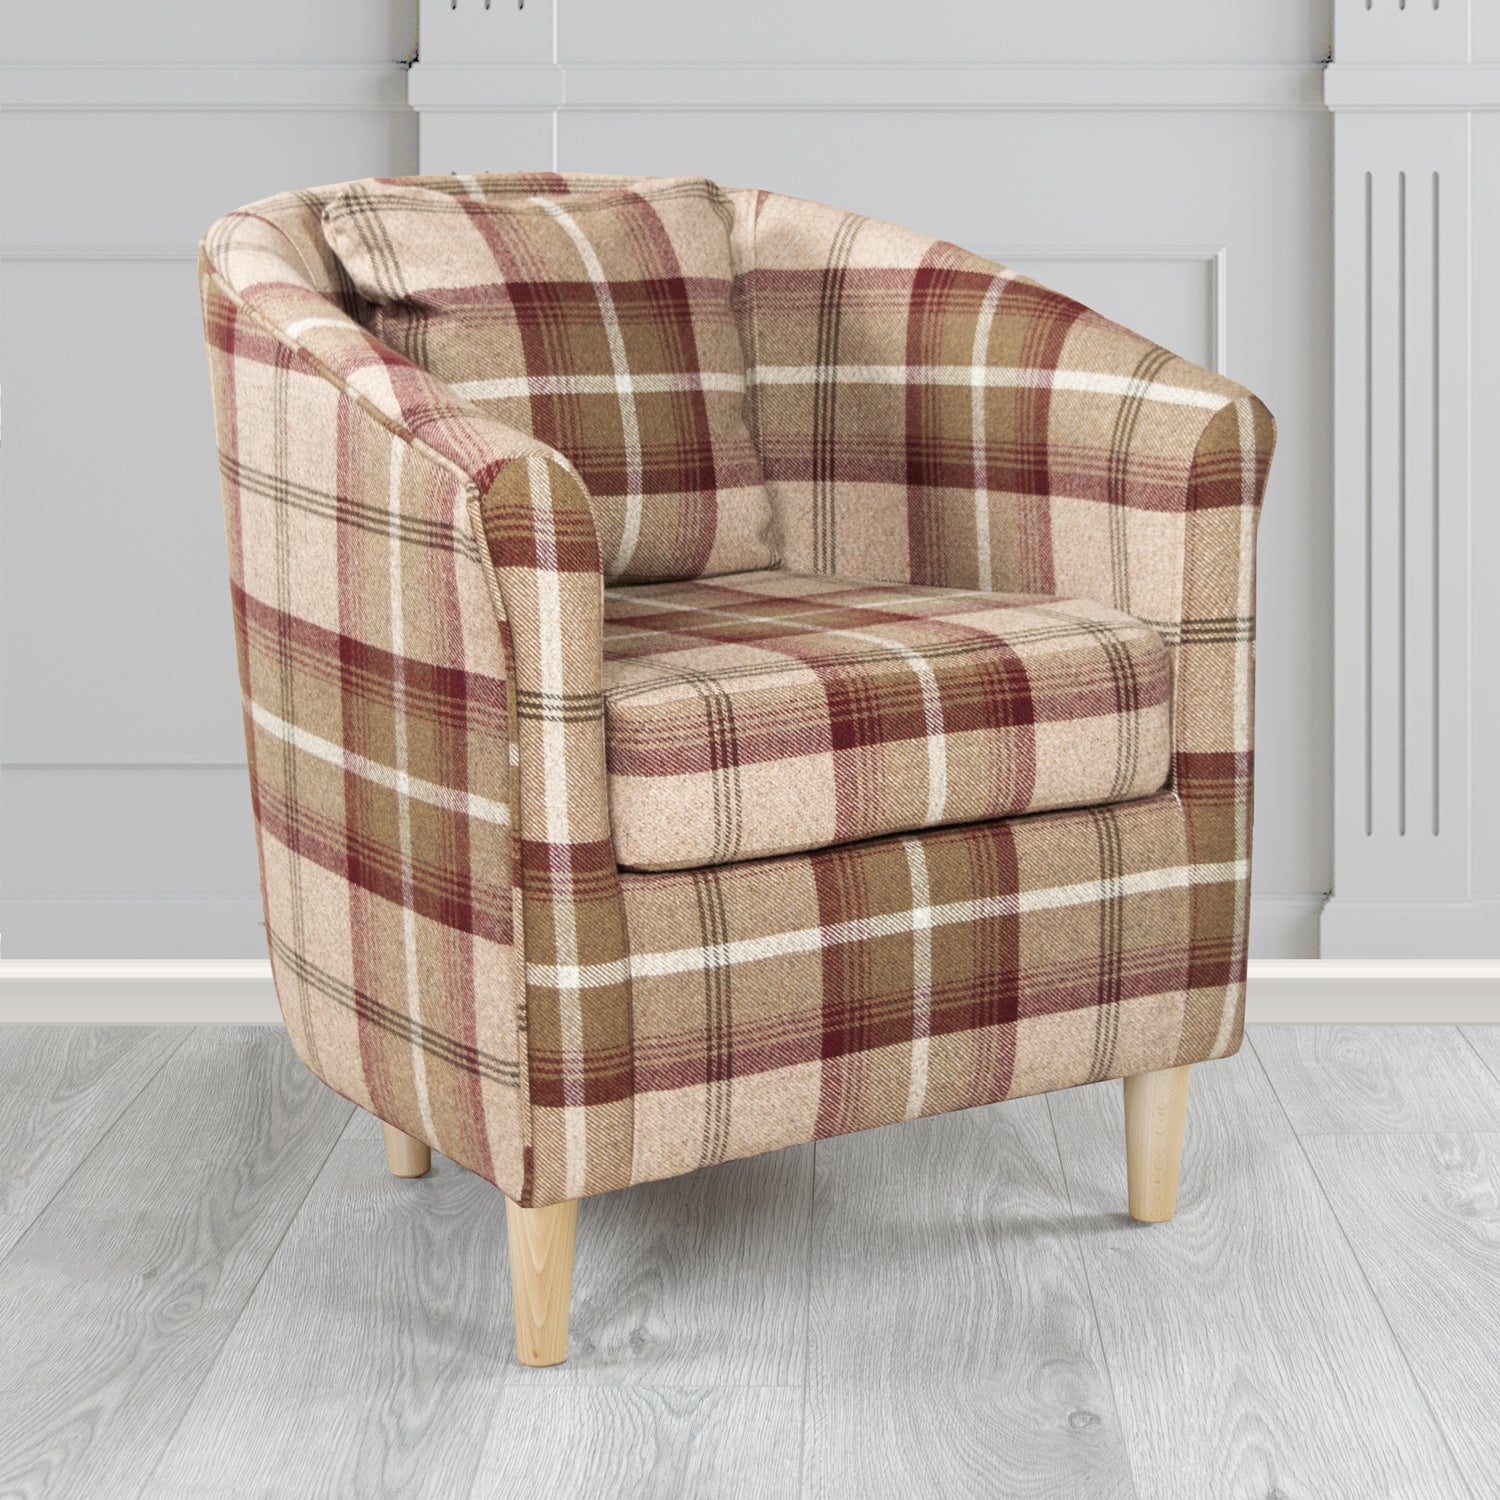 St Tropez Balmoral Mulberry Tartan Fabric Tub Chair with Scatter Cushion - The Tub Chair Shop